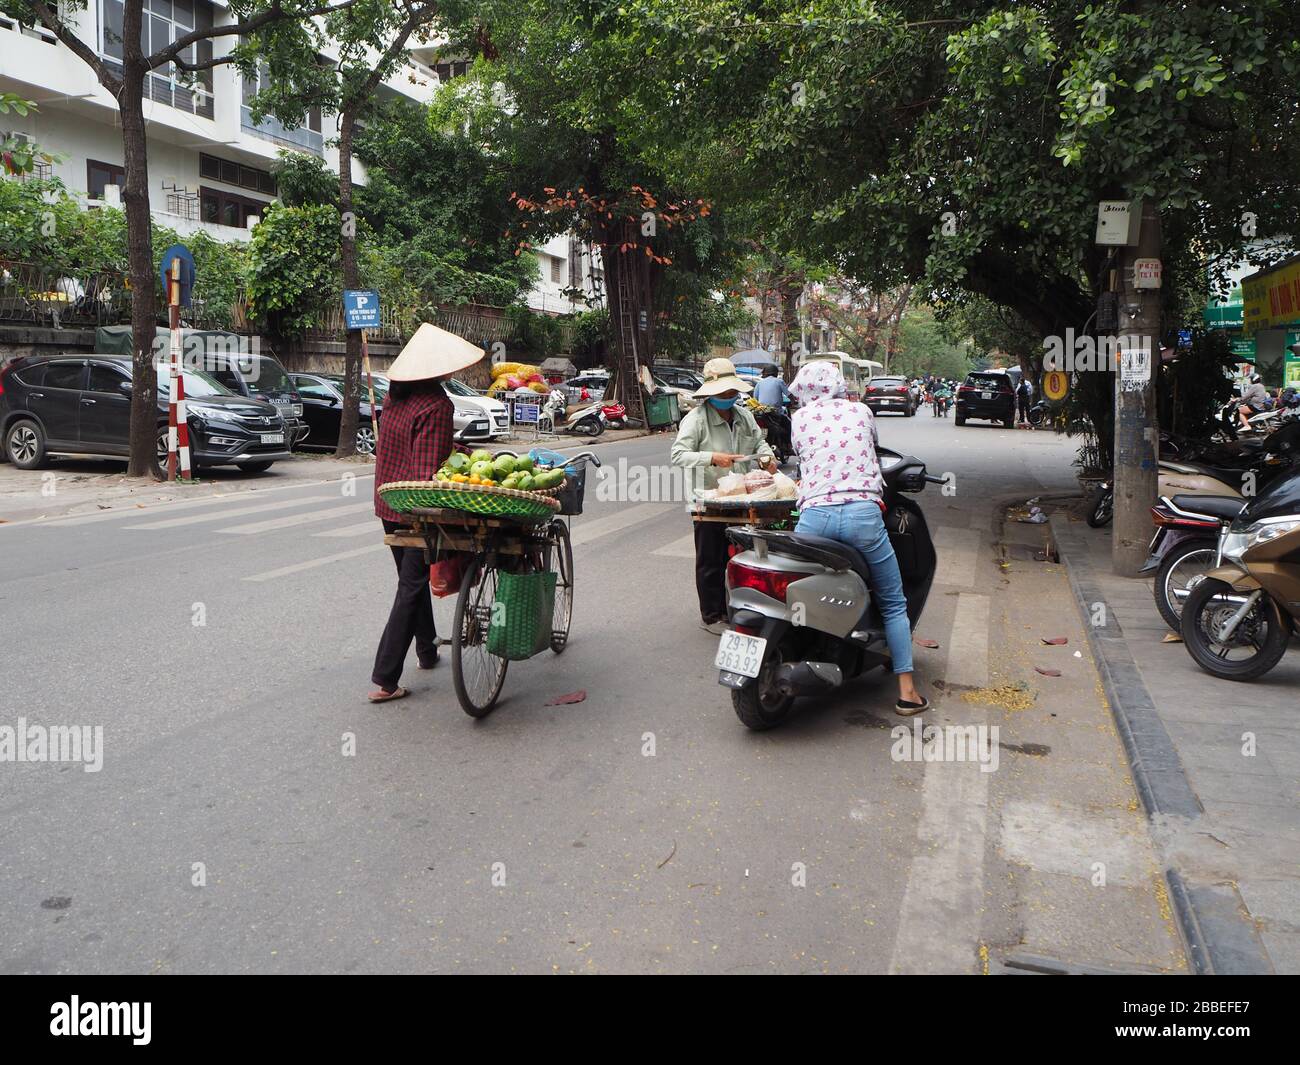 Women on bikes selling fresh fruit and other foods wearing conical hats and masks for protection during the coronavirus pandemic, Hanoi, Vietnam Stock Photo